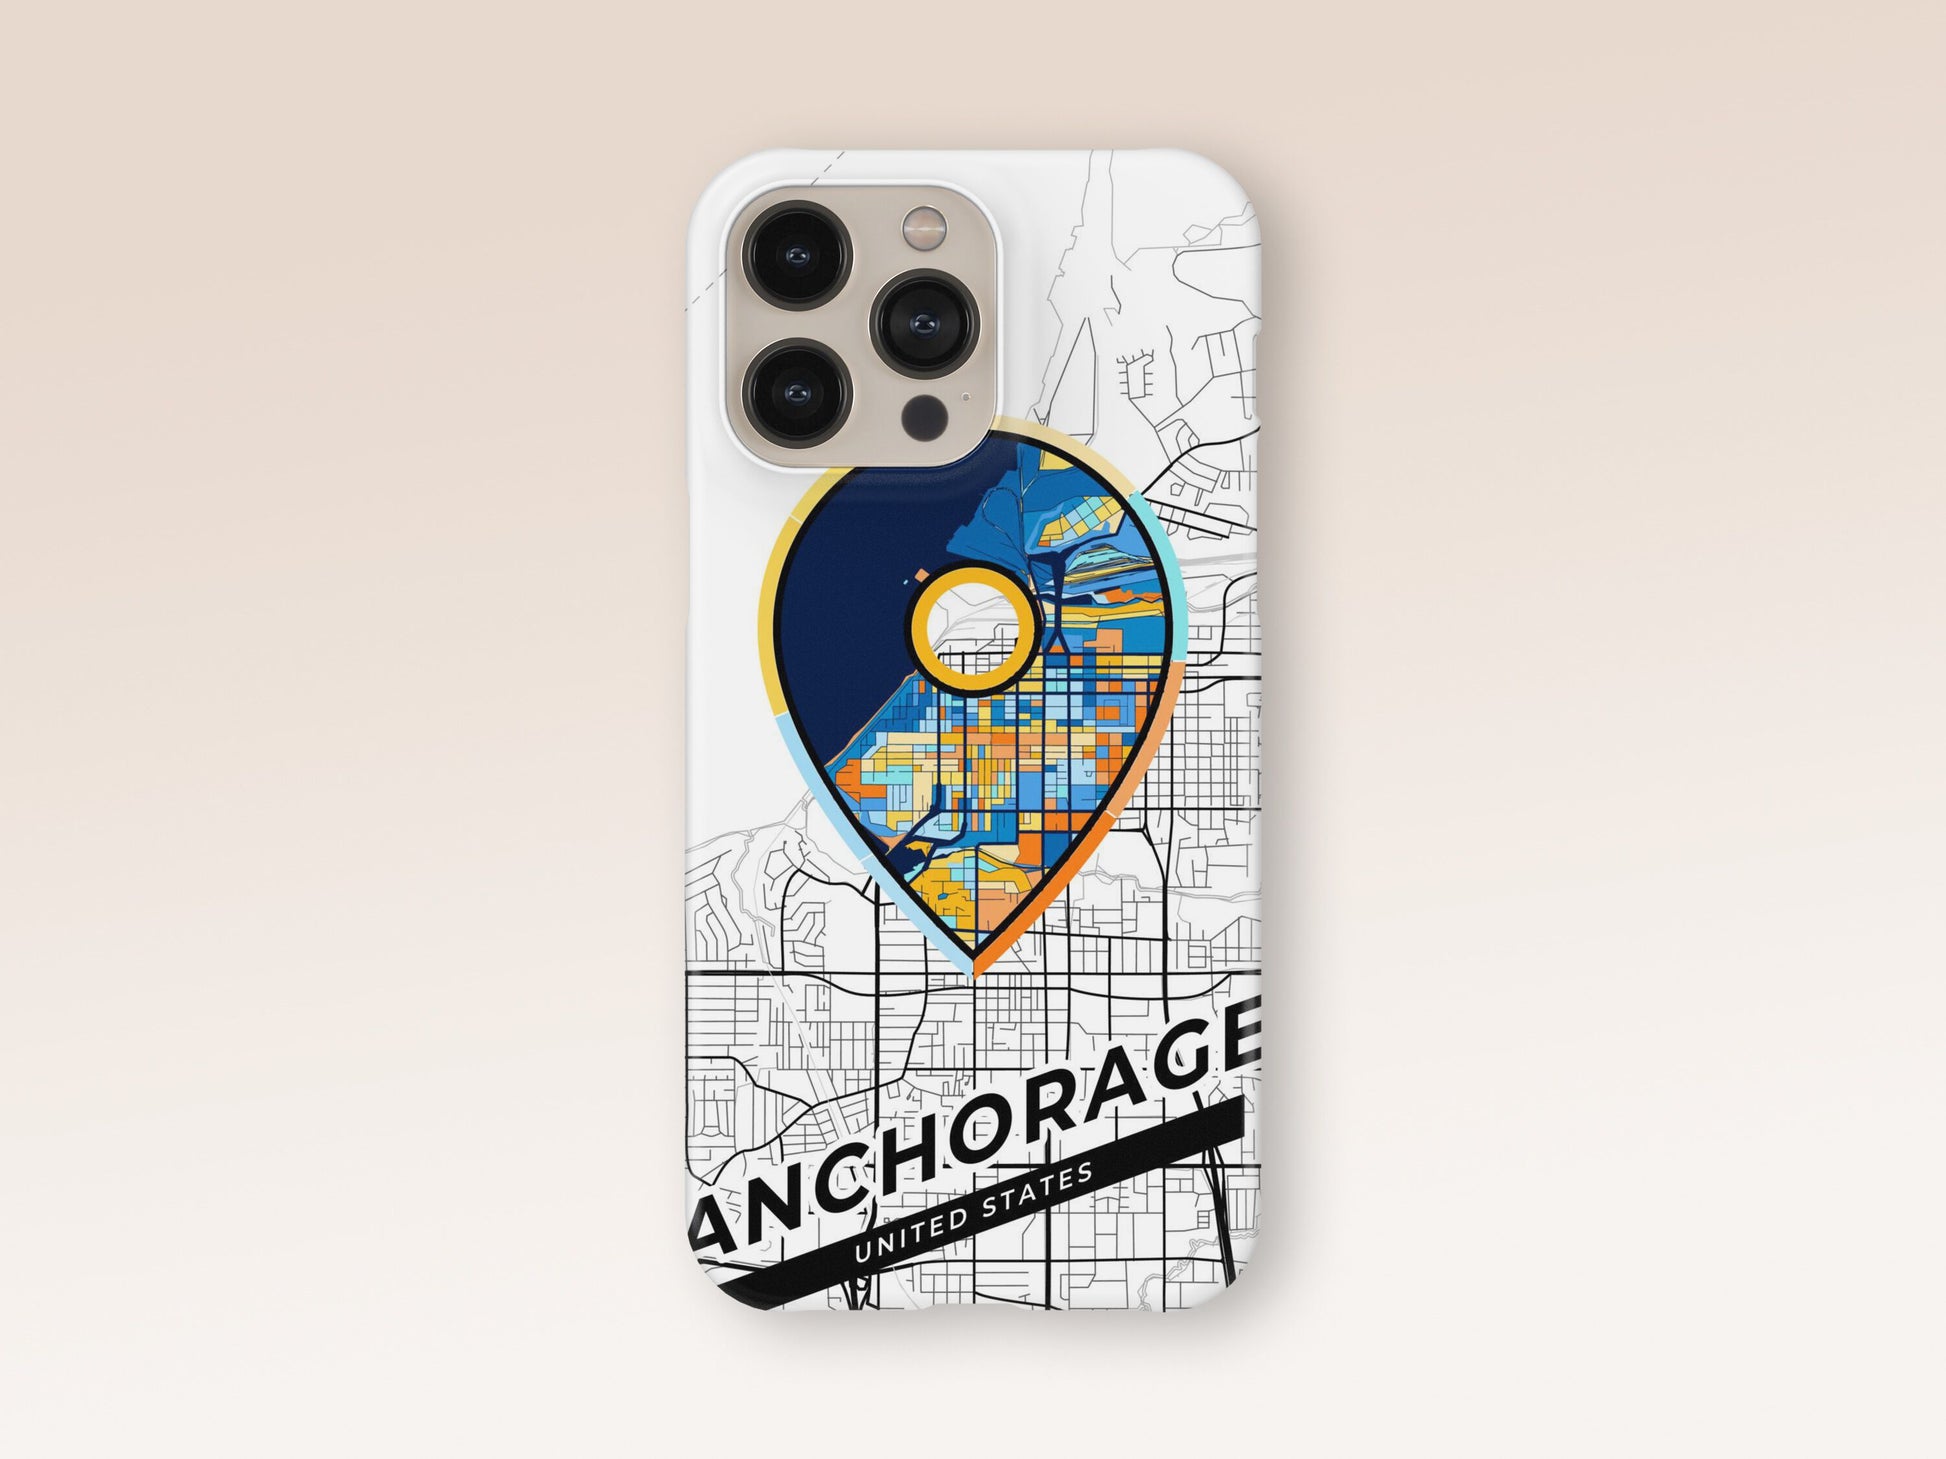 Anchorage Alaska slim phone case with colorful icon. Birthday, wedding or housewarming gift. Couple match cases. 1